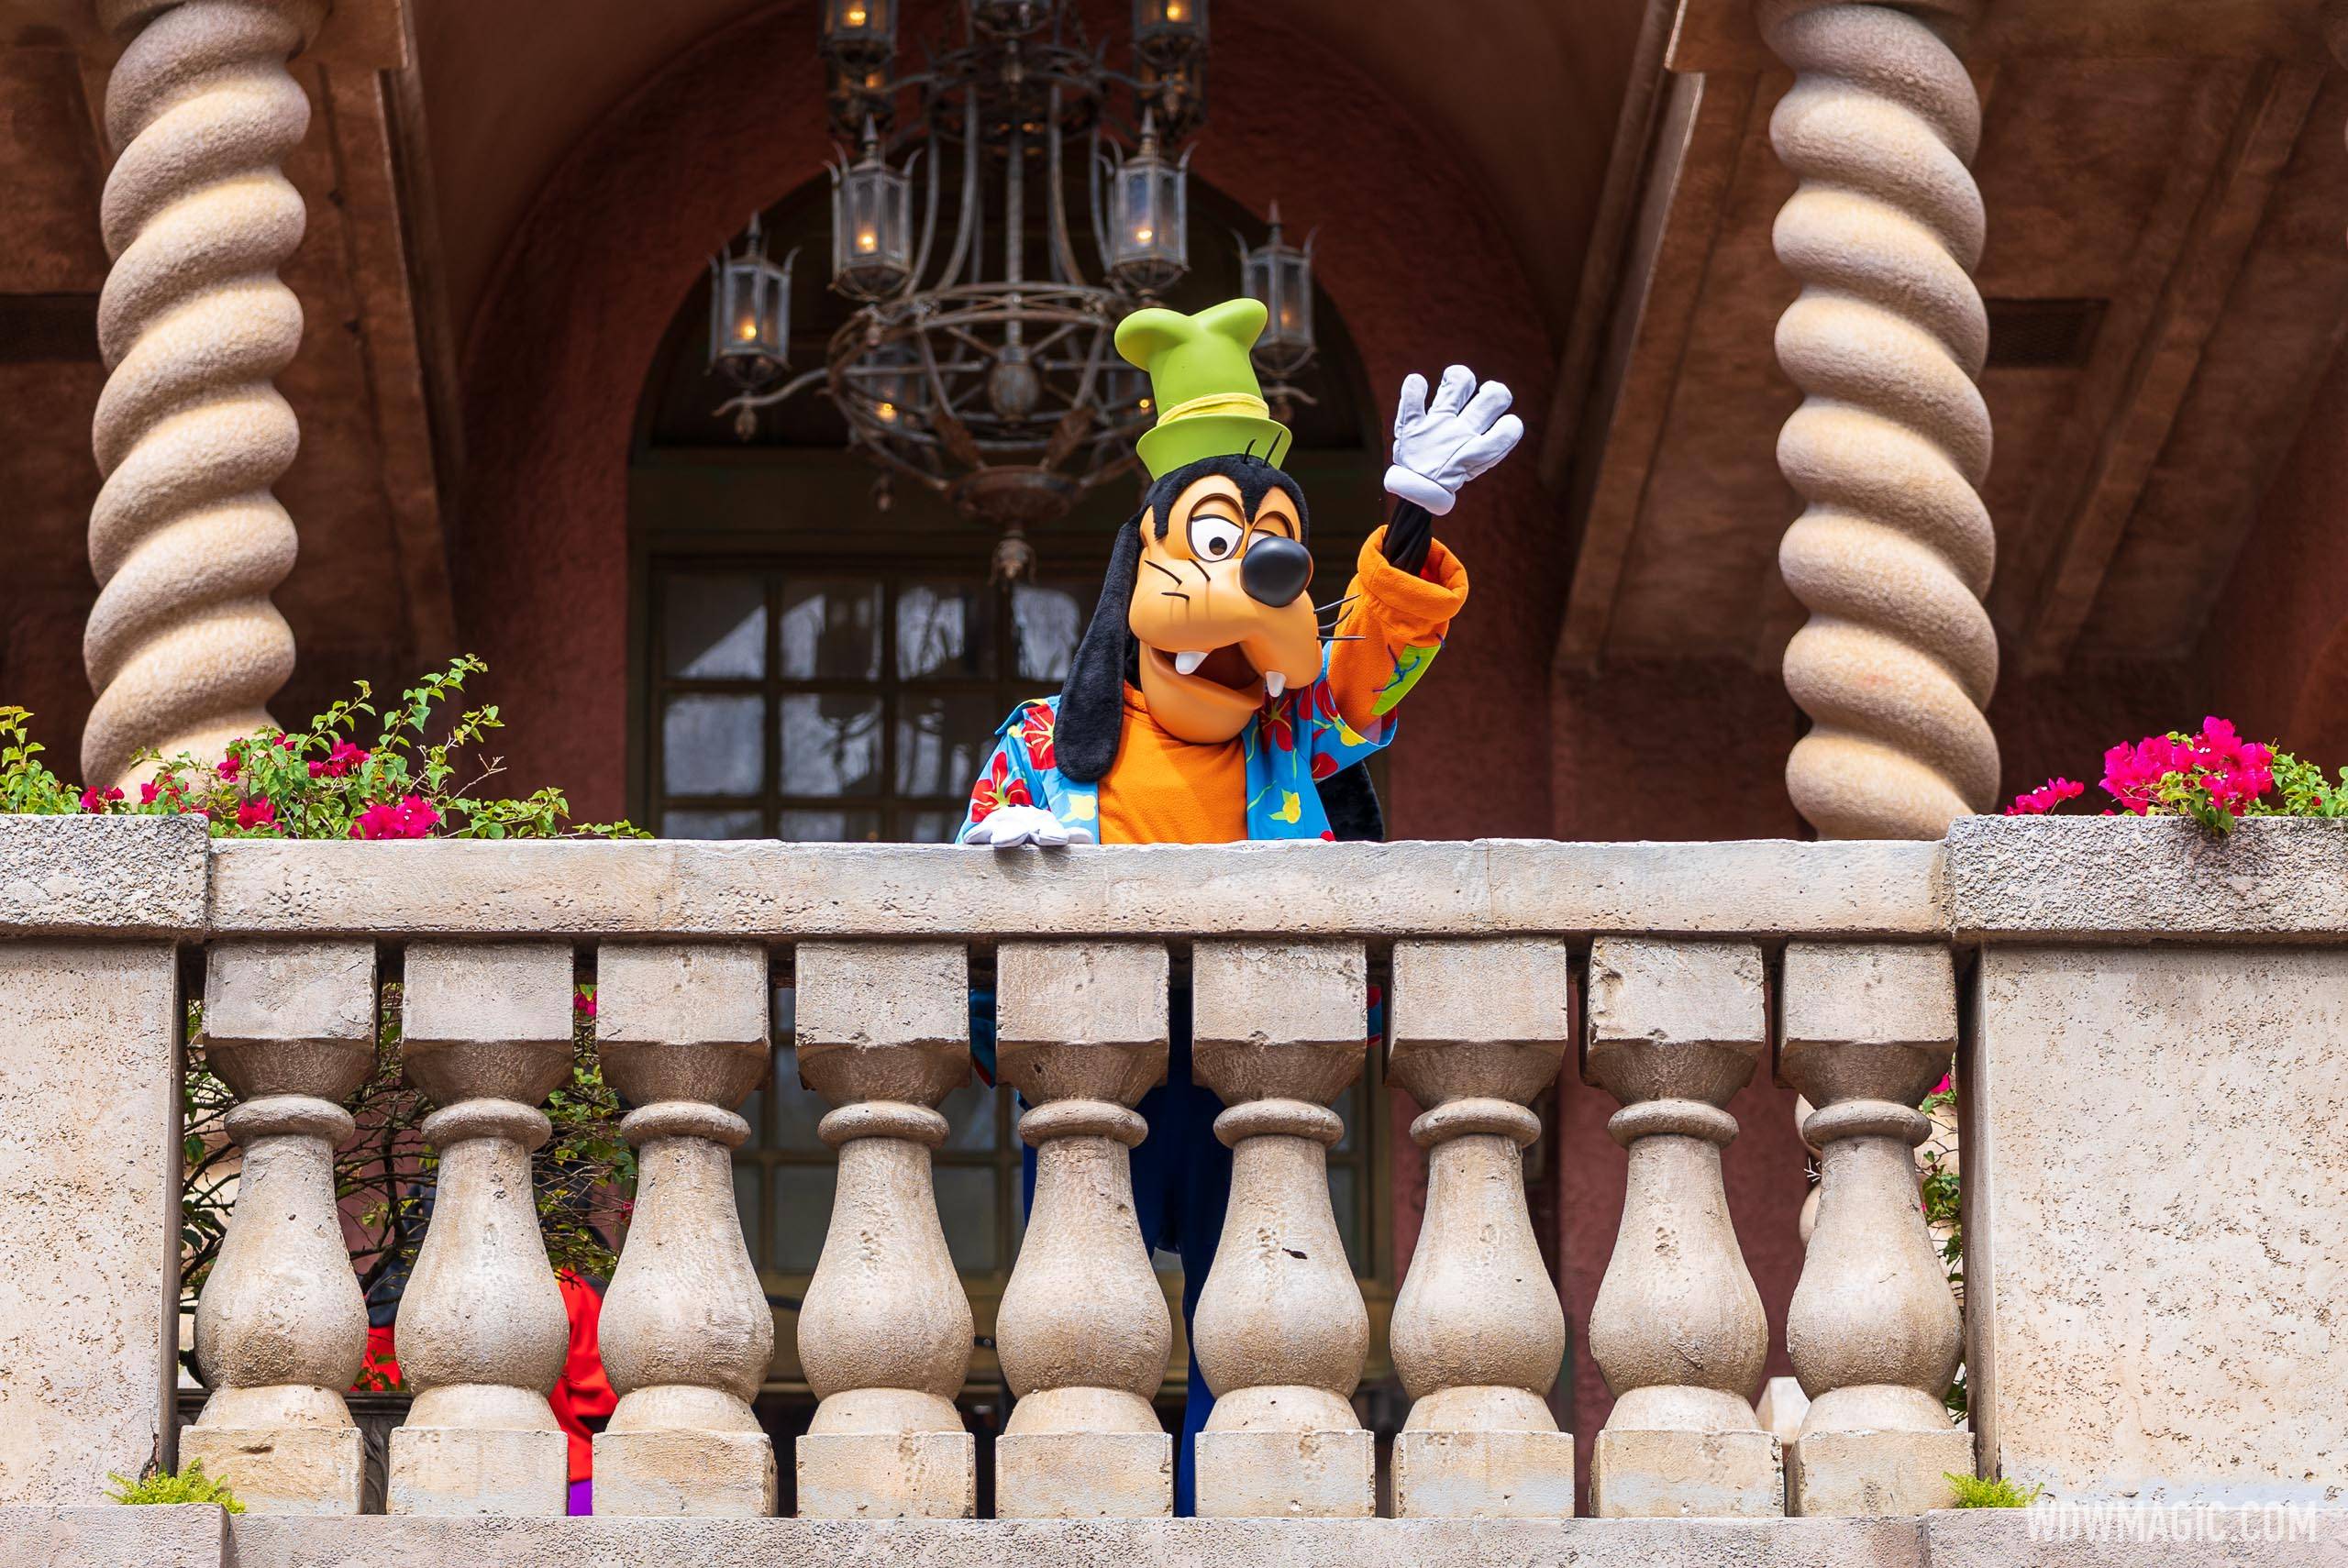 Goofy and Max at The Hollywood Tower Hotel